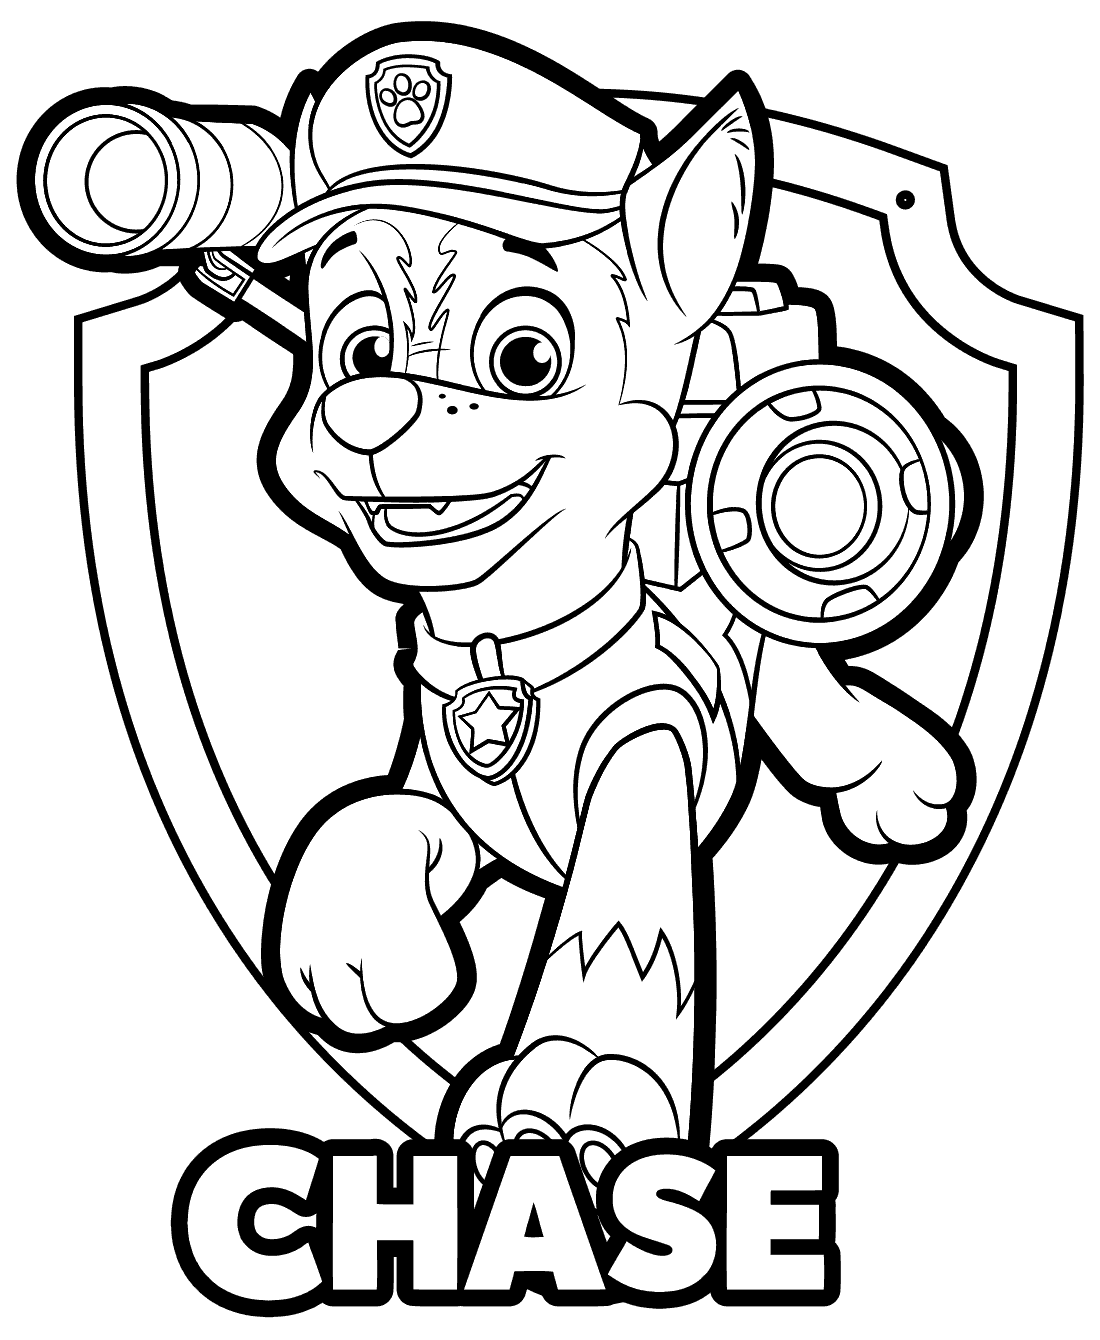 Chase - Paw Patrol Coloring Pages